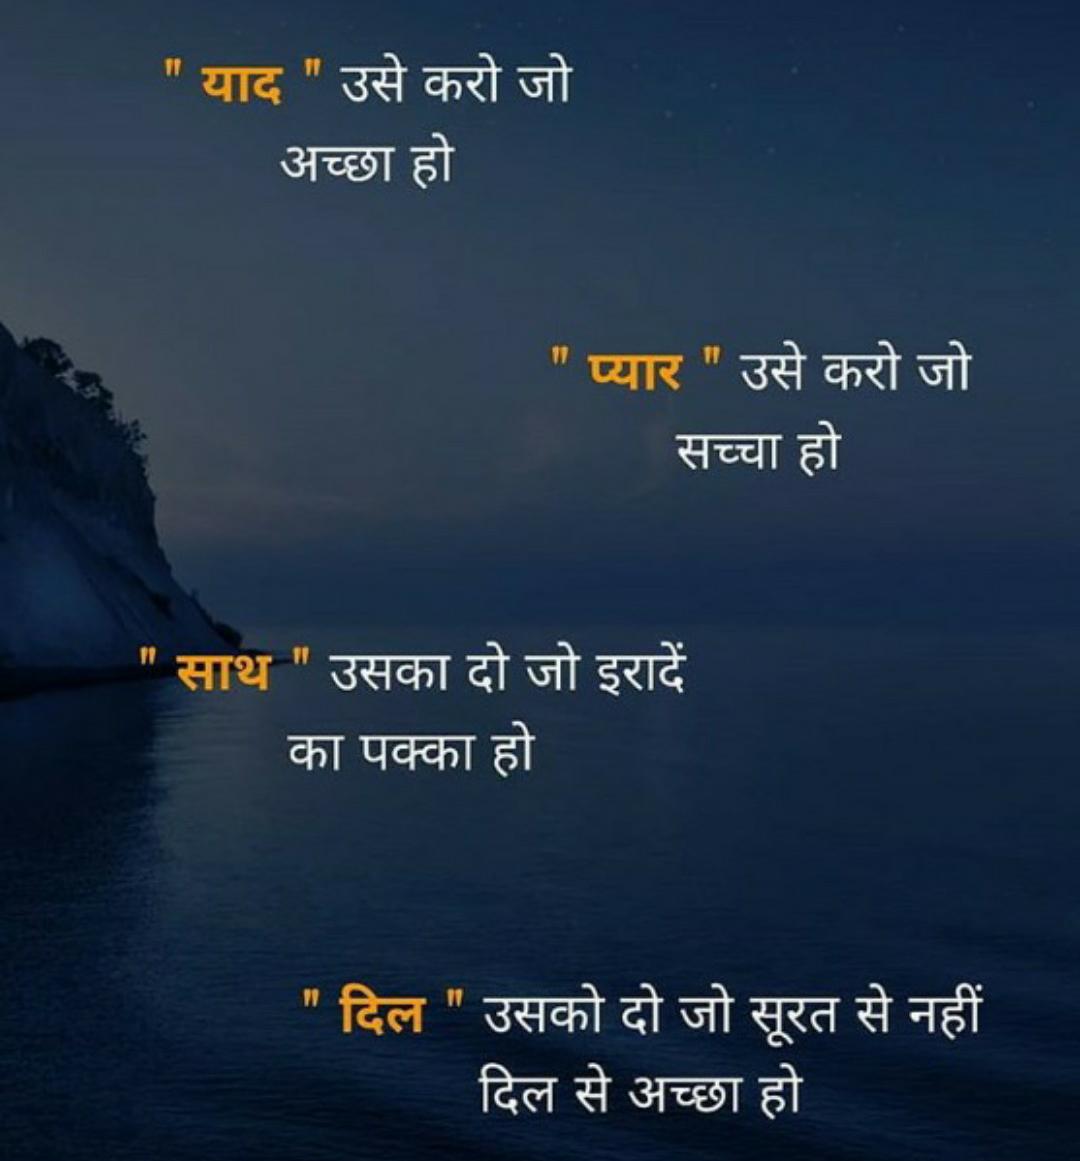 inspirational-life-quotes-in-hindi-28.jpg